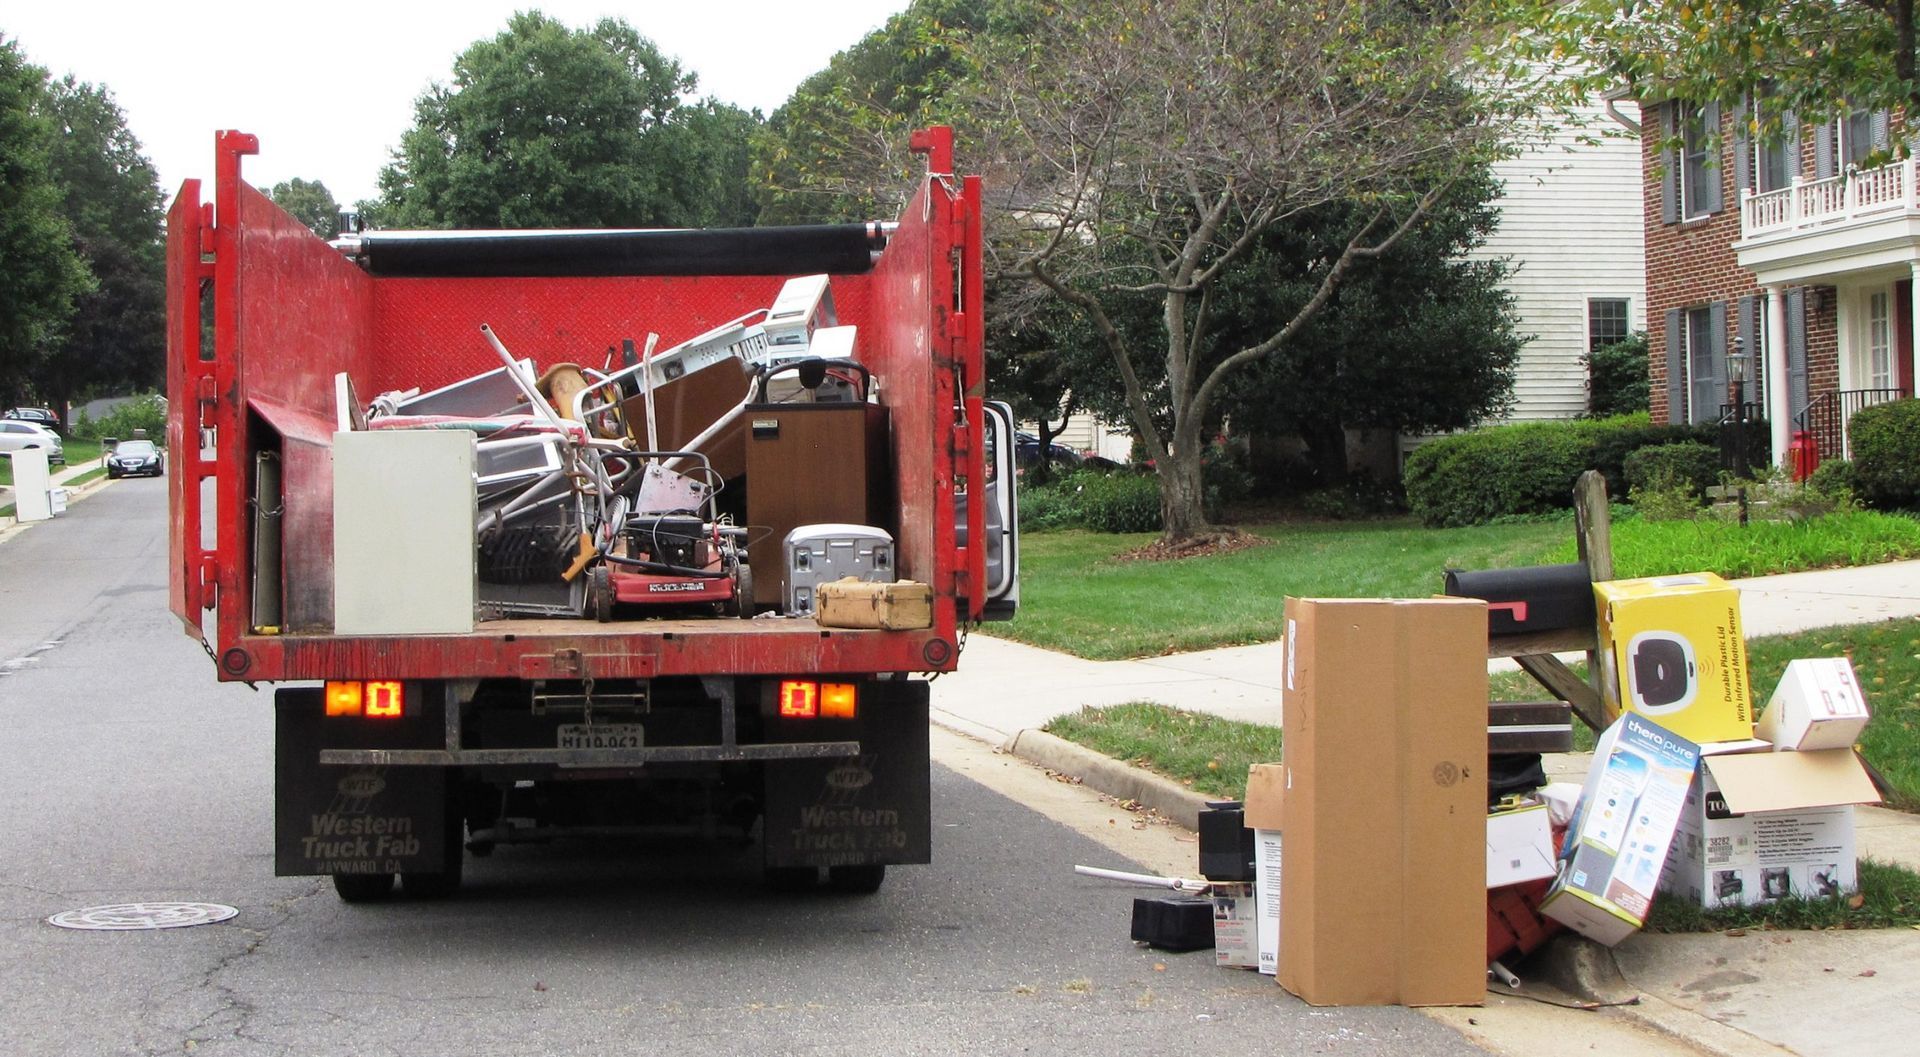 a dumpster rental used and serviced for a resident for debris management